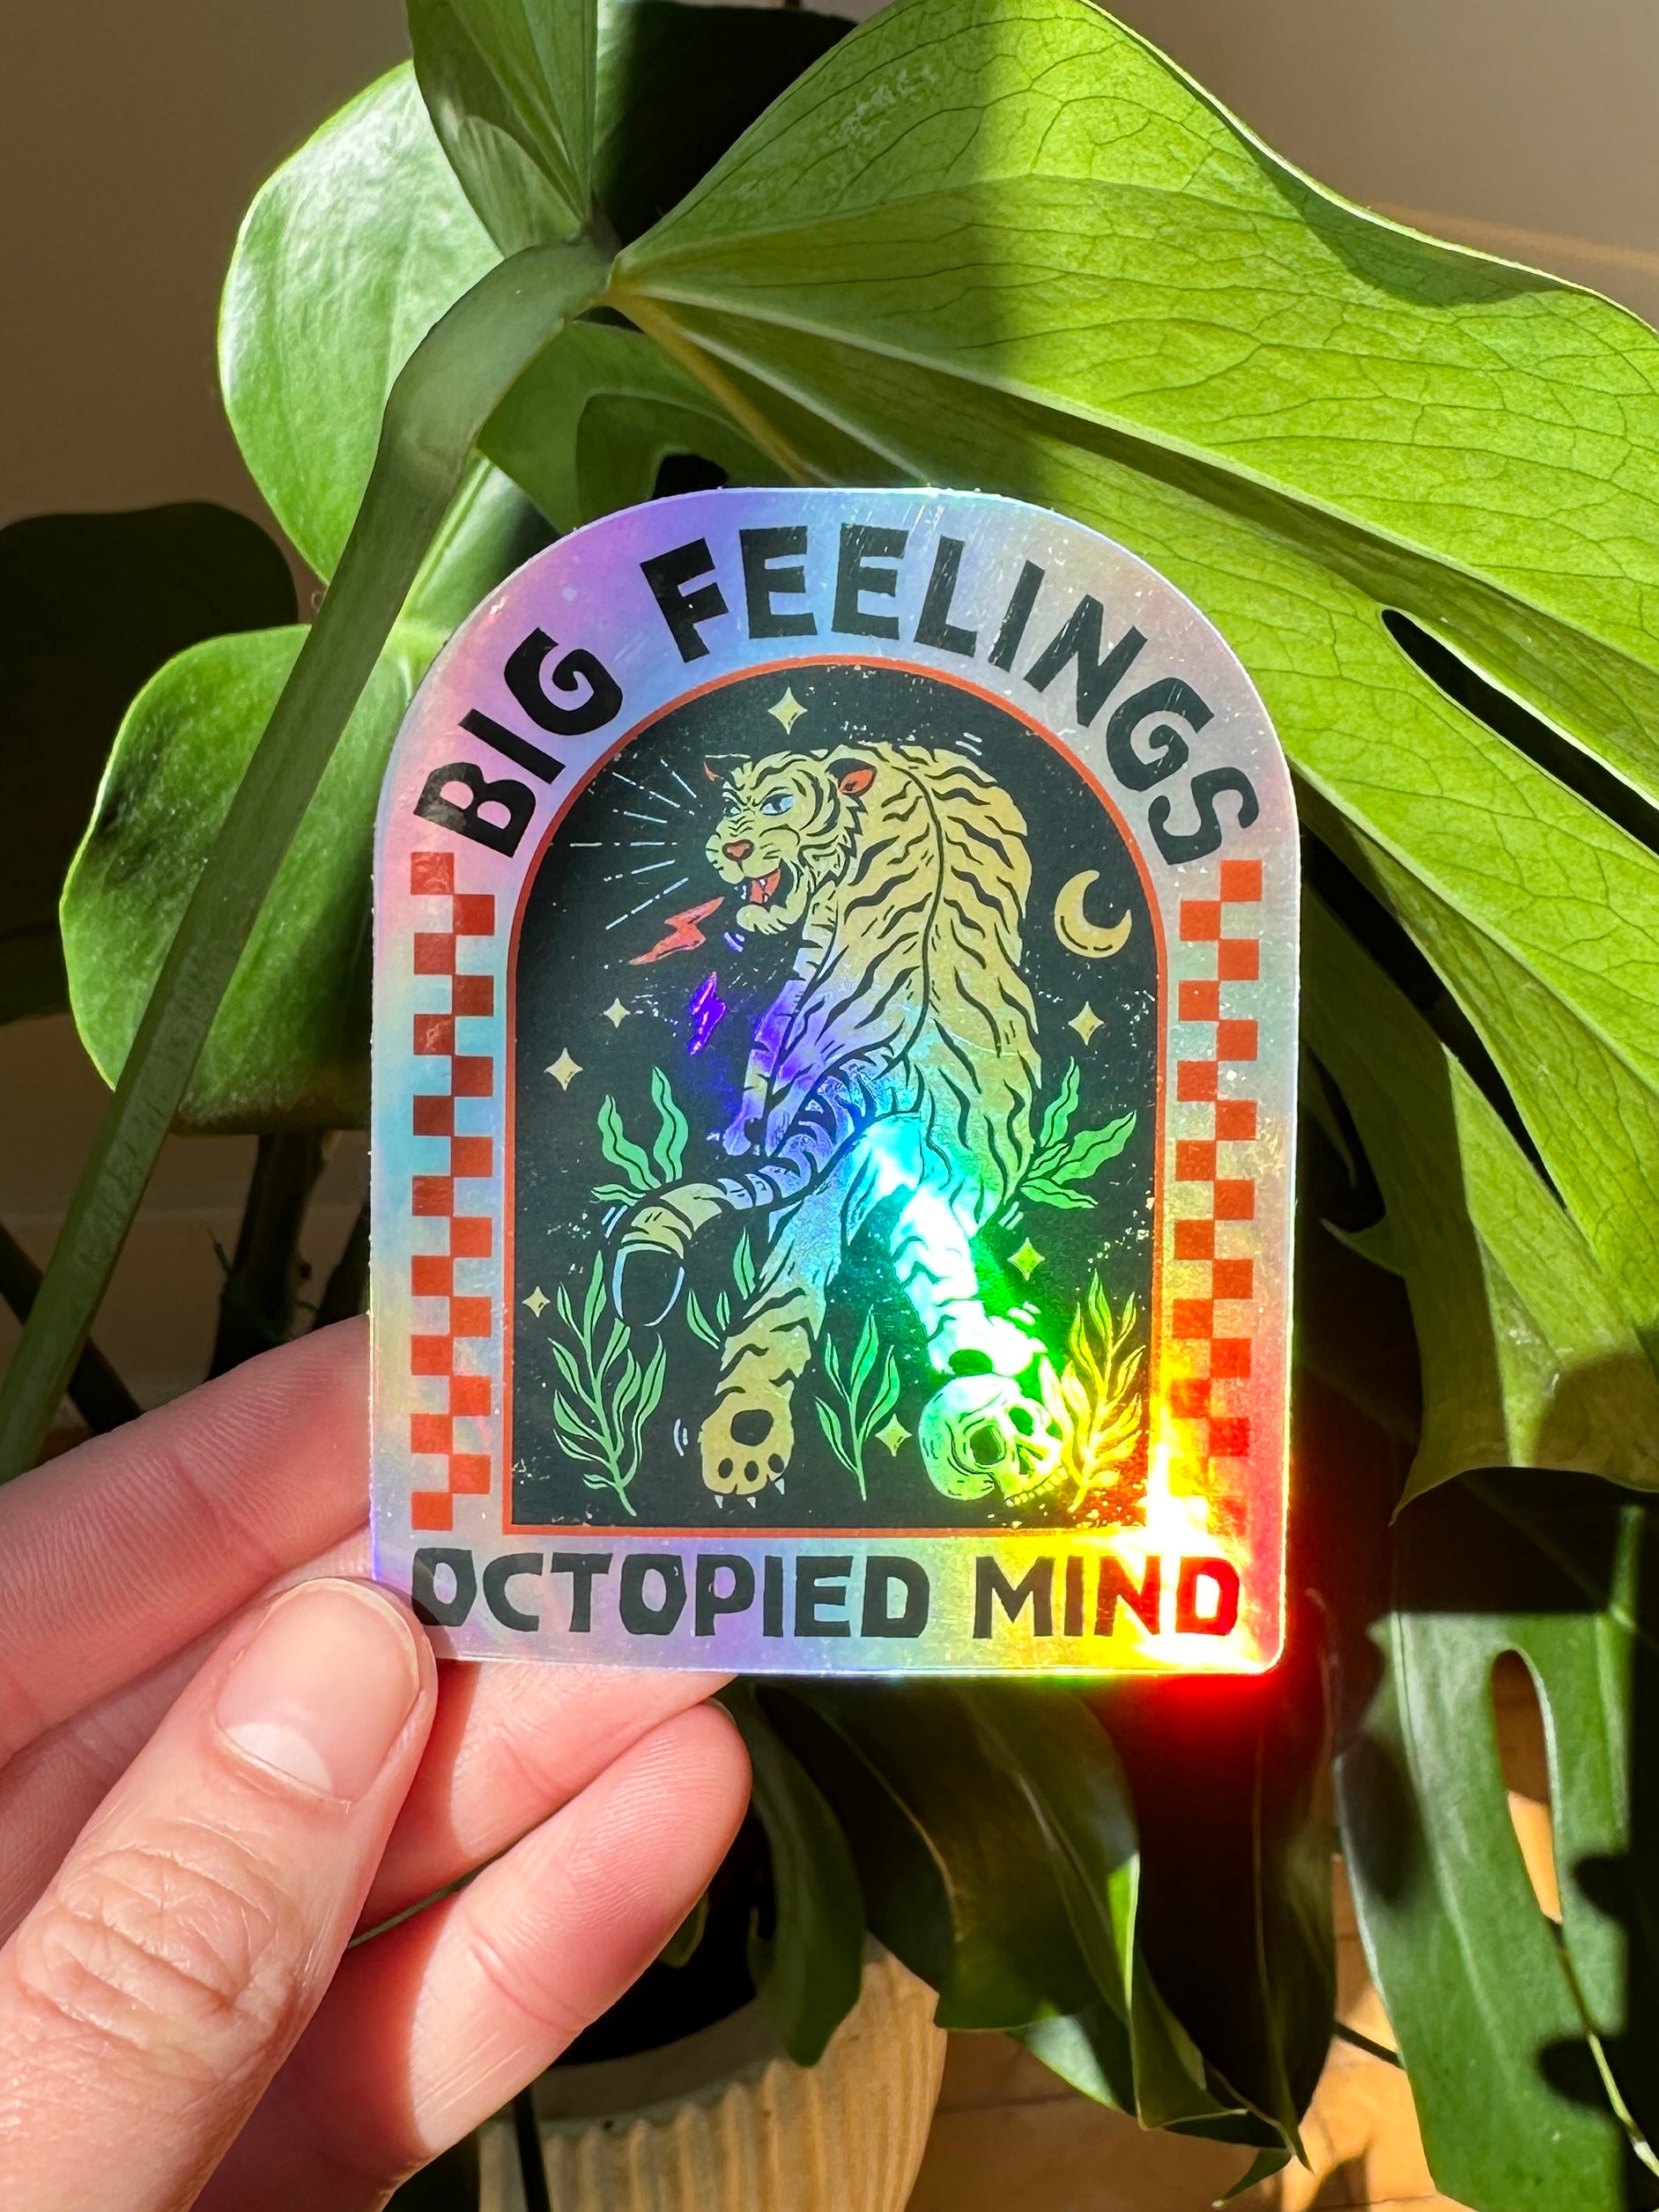 Big Feelings Holographic Sticker - Octopied Mind